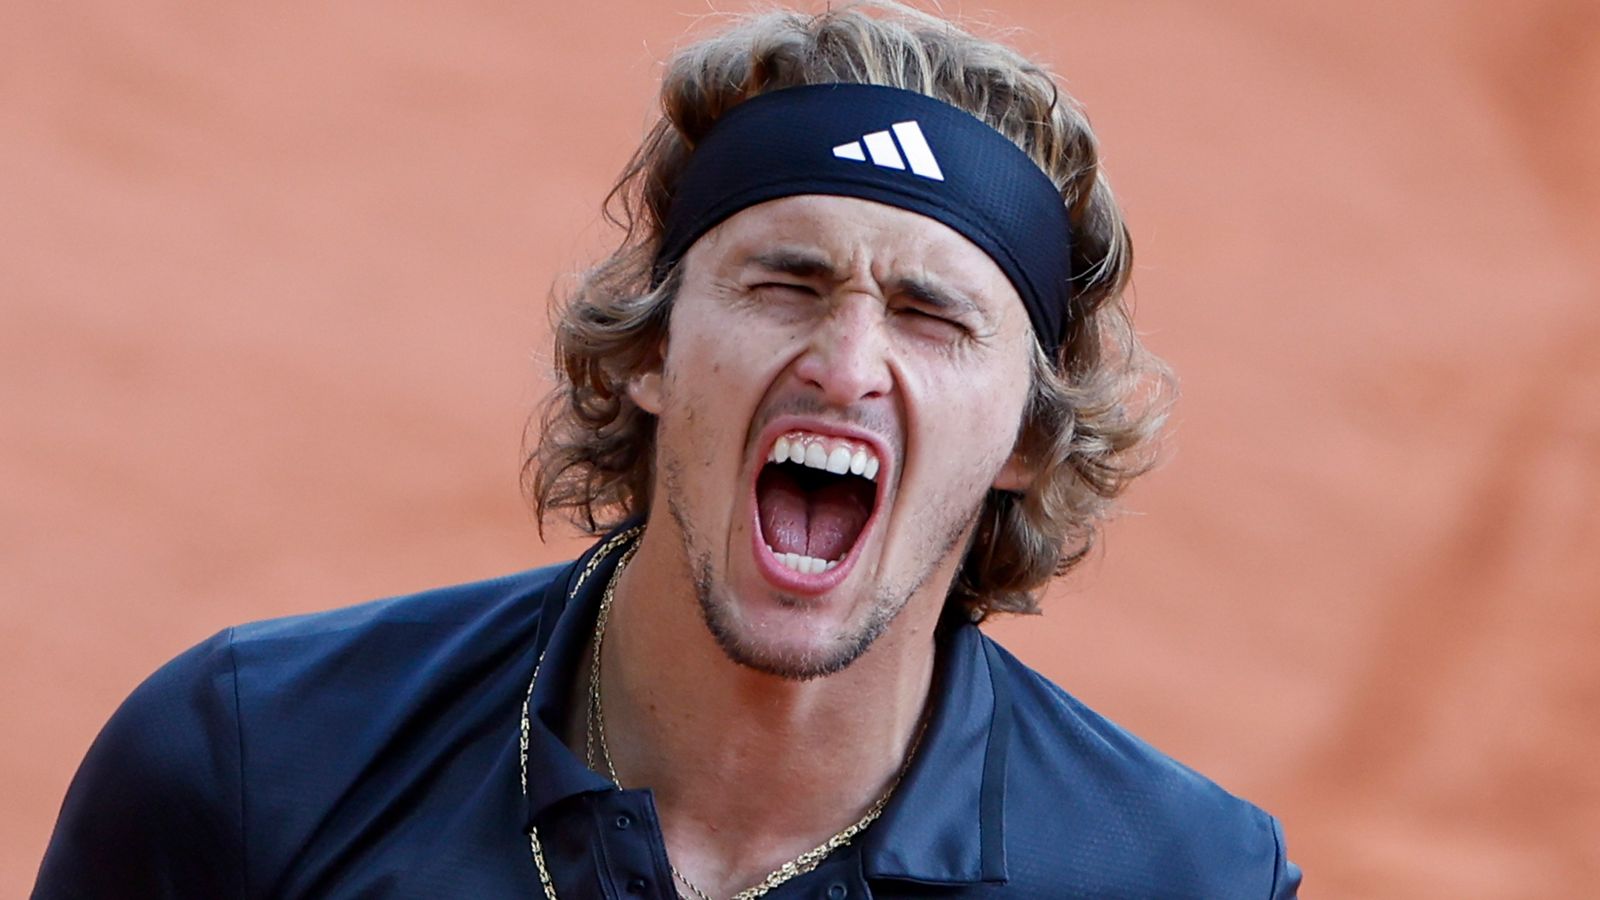 French Open Alexander Zverev makes semifinals again after beating